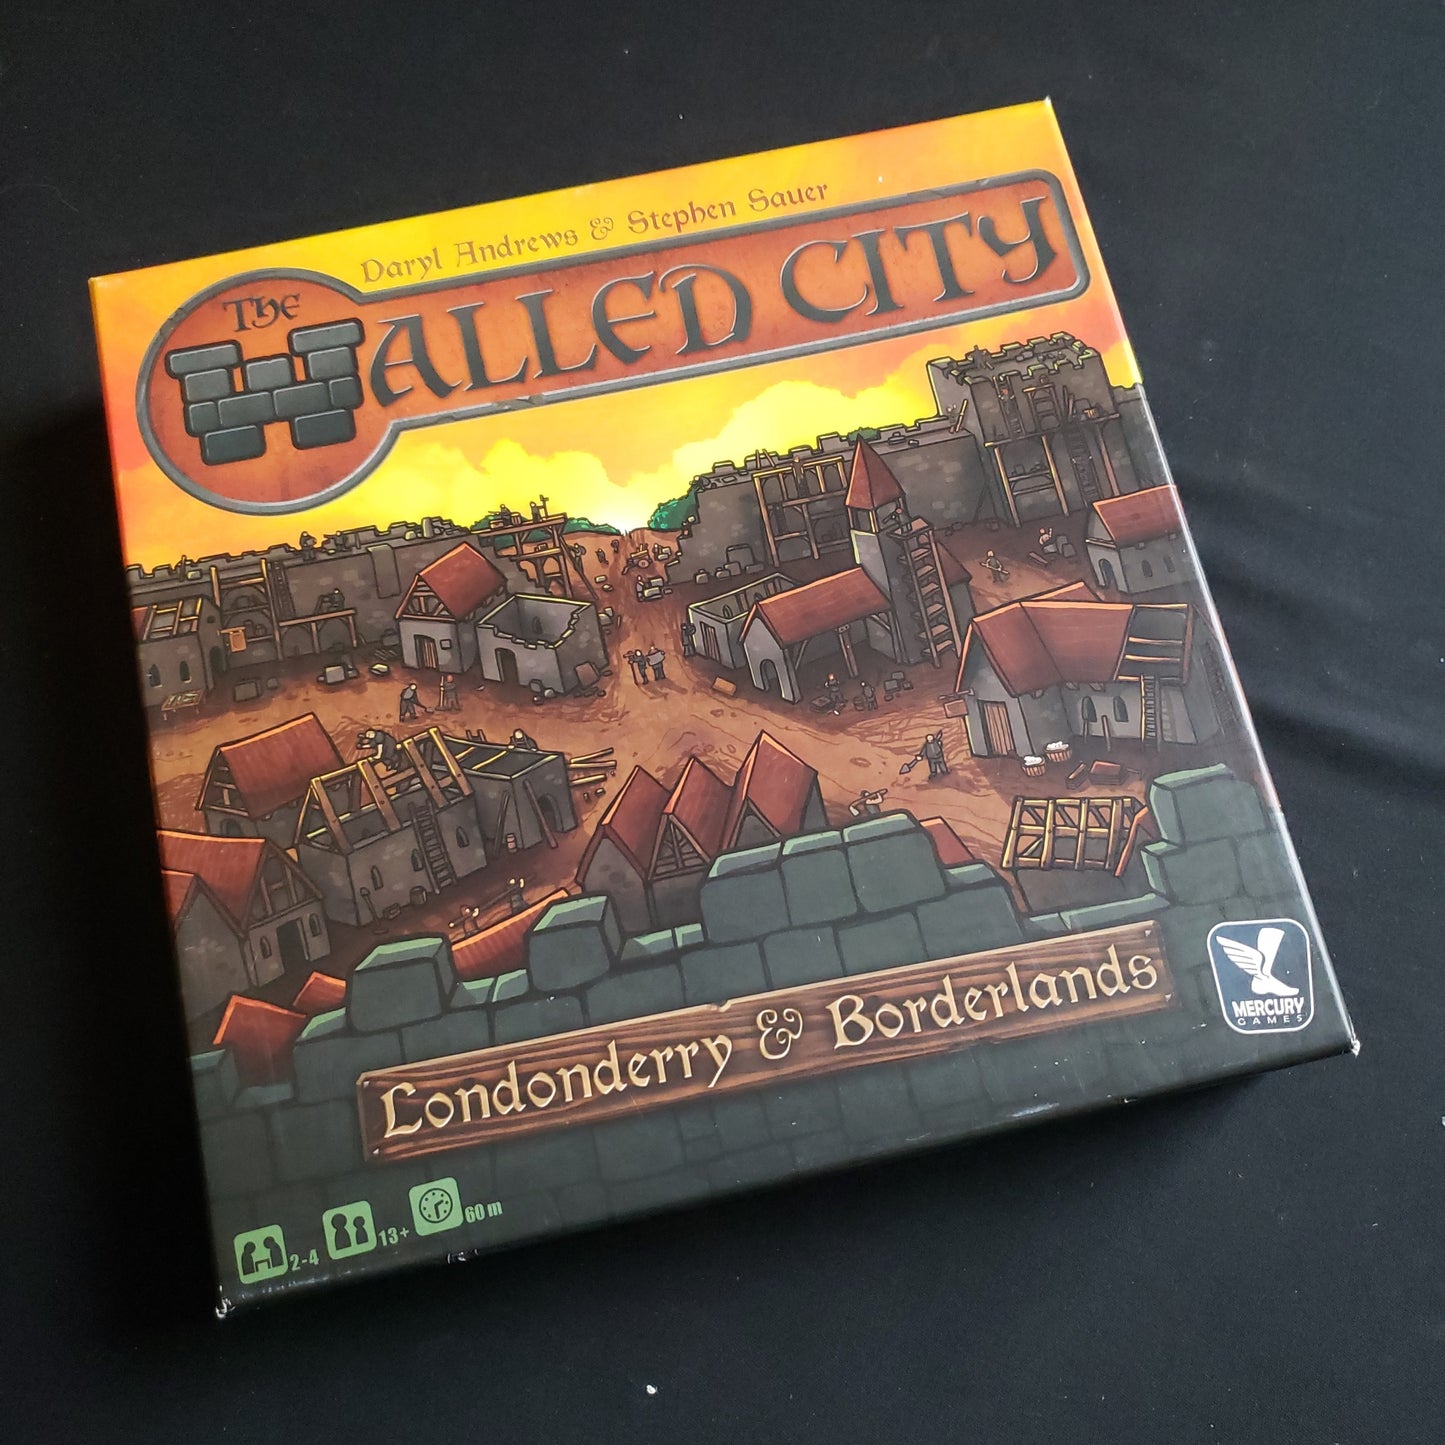 Image shows the front cover of the box of the Walled City board game